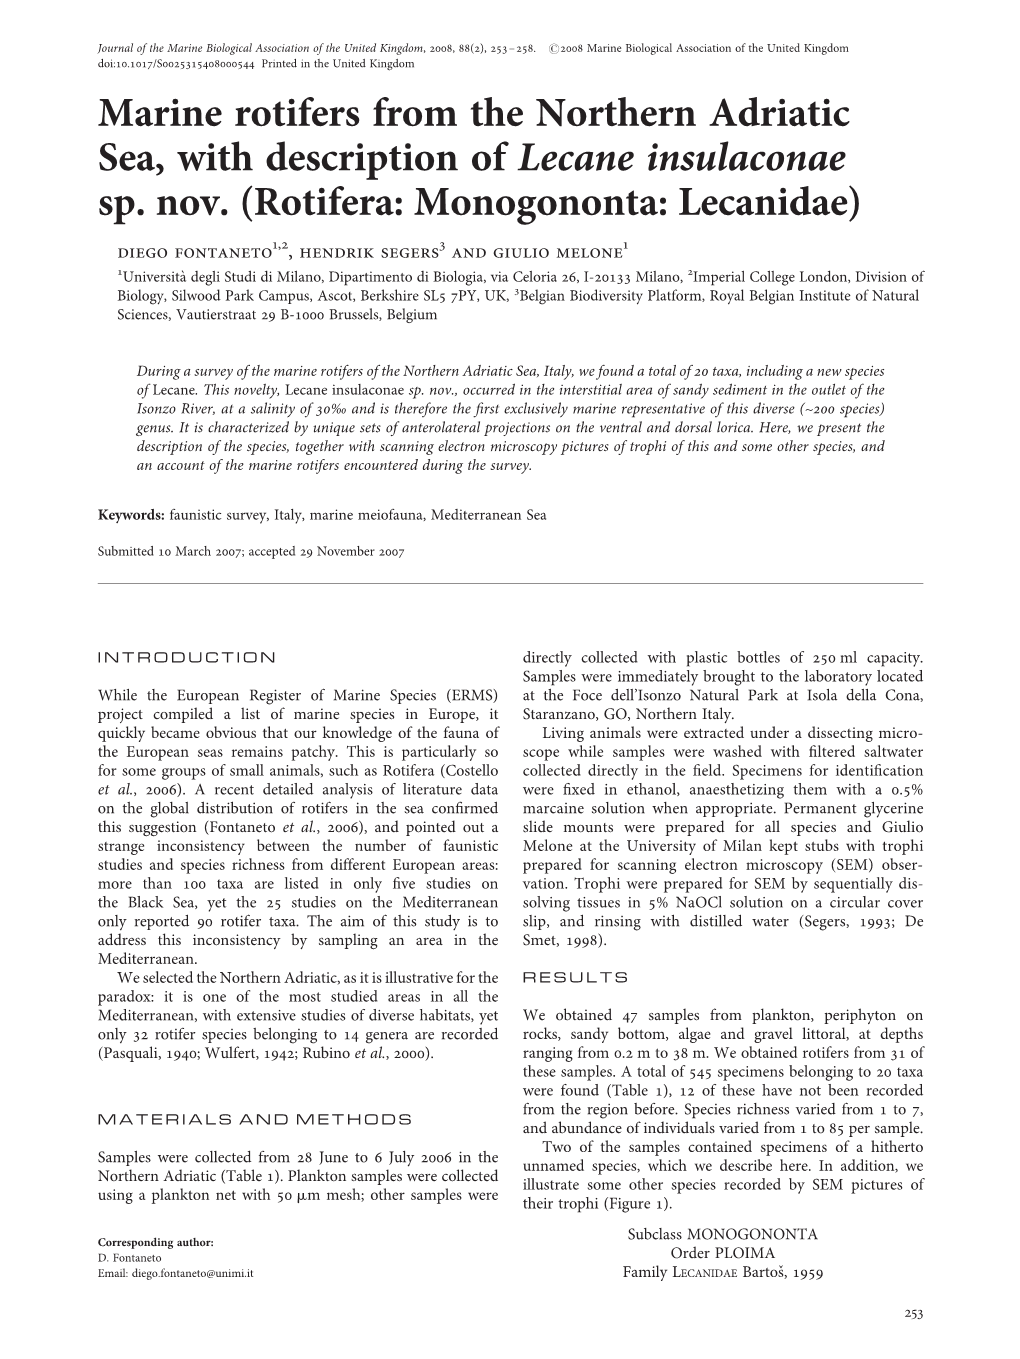 Marine Rotifers from the Northern Adriatic Sea, with Description of Lecane Insulaconae Sp